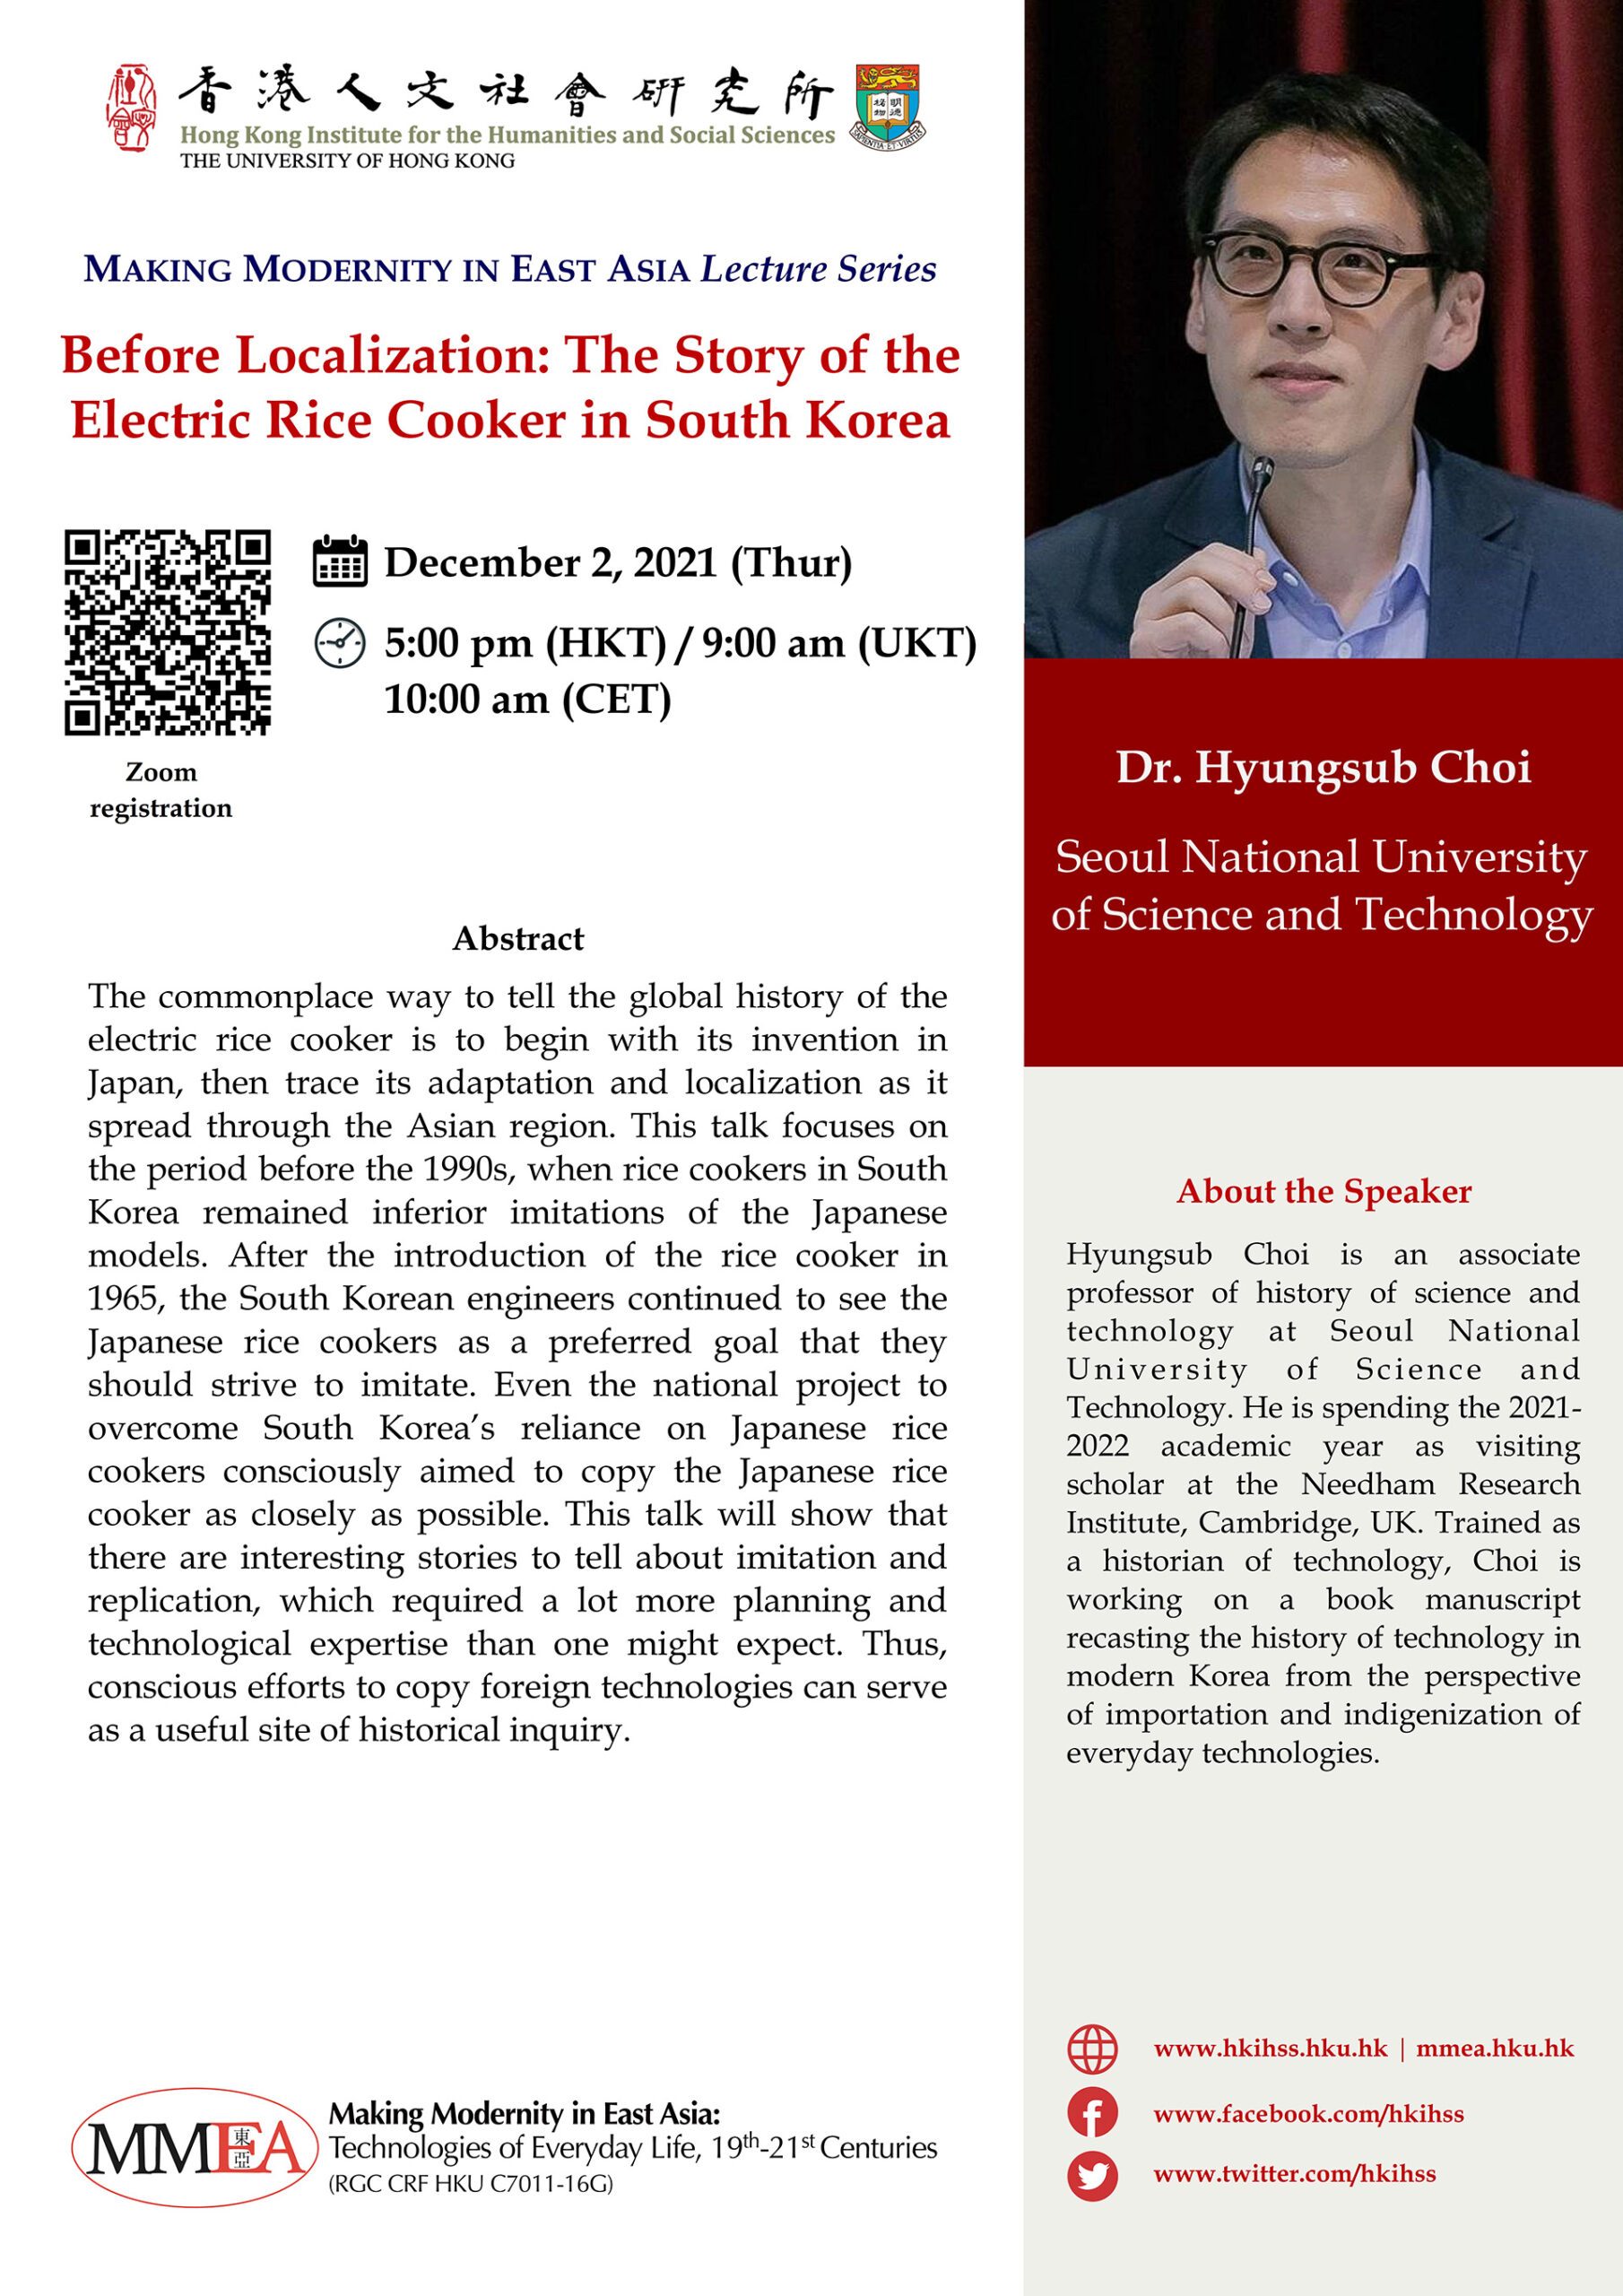 MMEA Lecture Series “Before Localization: The Story of the Electric Rice Cooker in South Korea” by Dr. Hyungsub Choi (December 2, 2021)